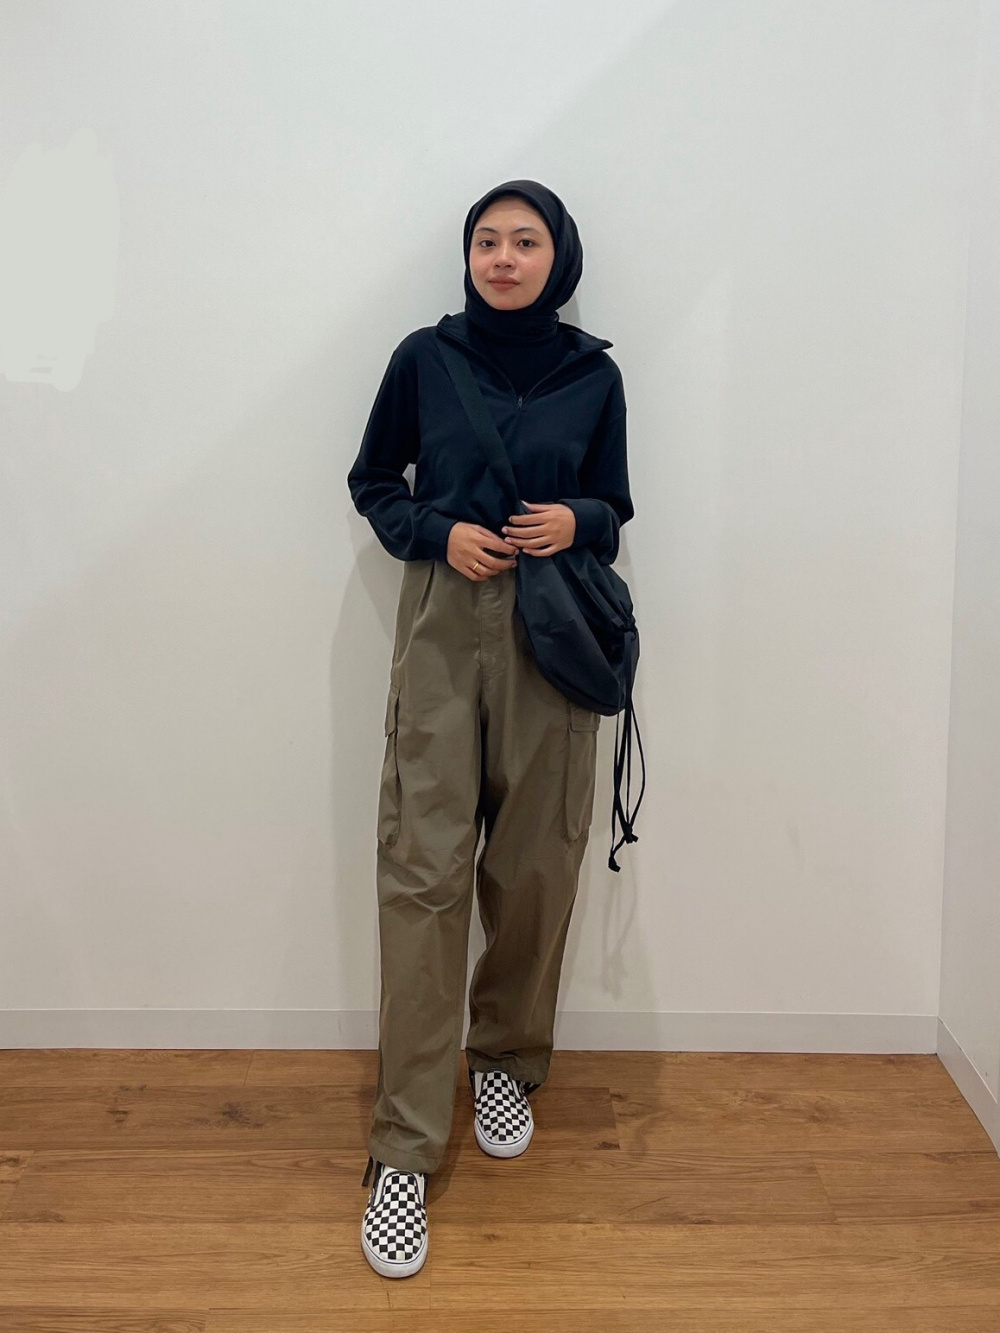 Cargo pants outfit  How to style cargo pants. Cargo pants outfit hijab, cargo  pants outfit.